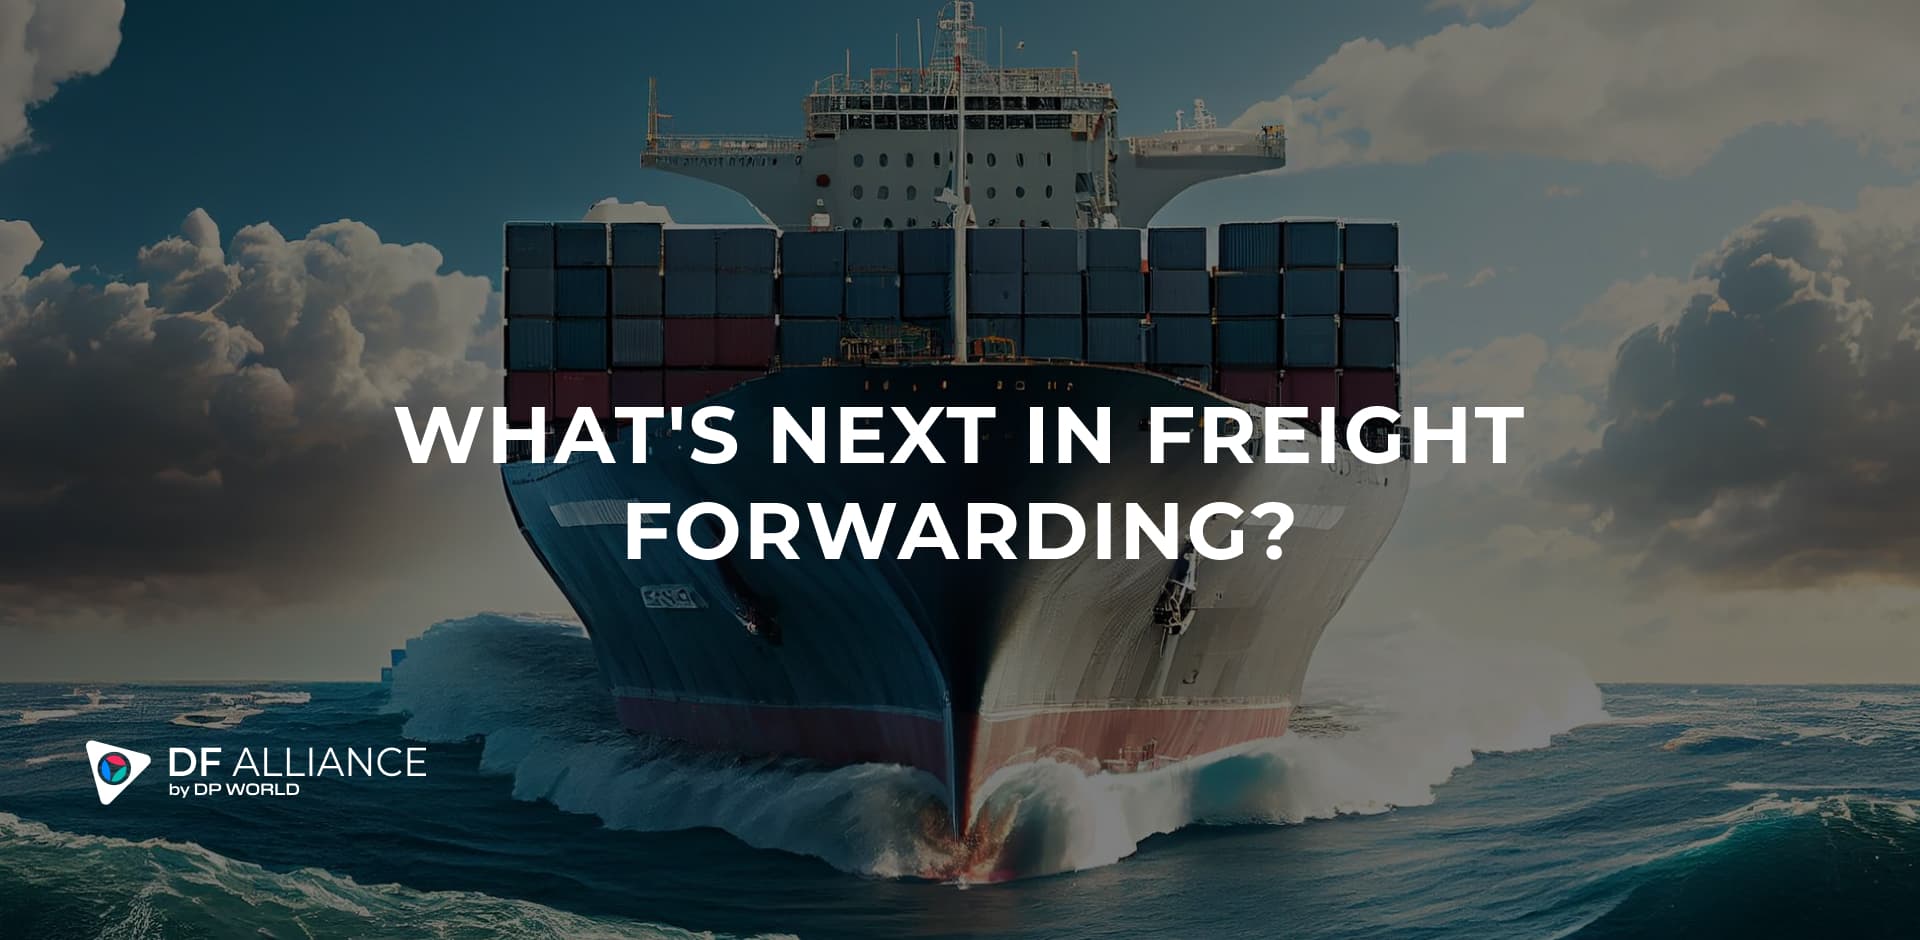 DF Alliance's Vision for Sustainable Shipping: What's Next in Freight Forwarding?